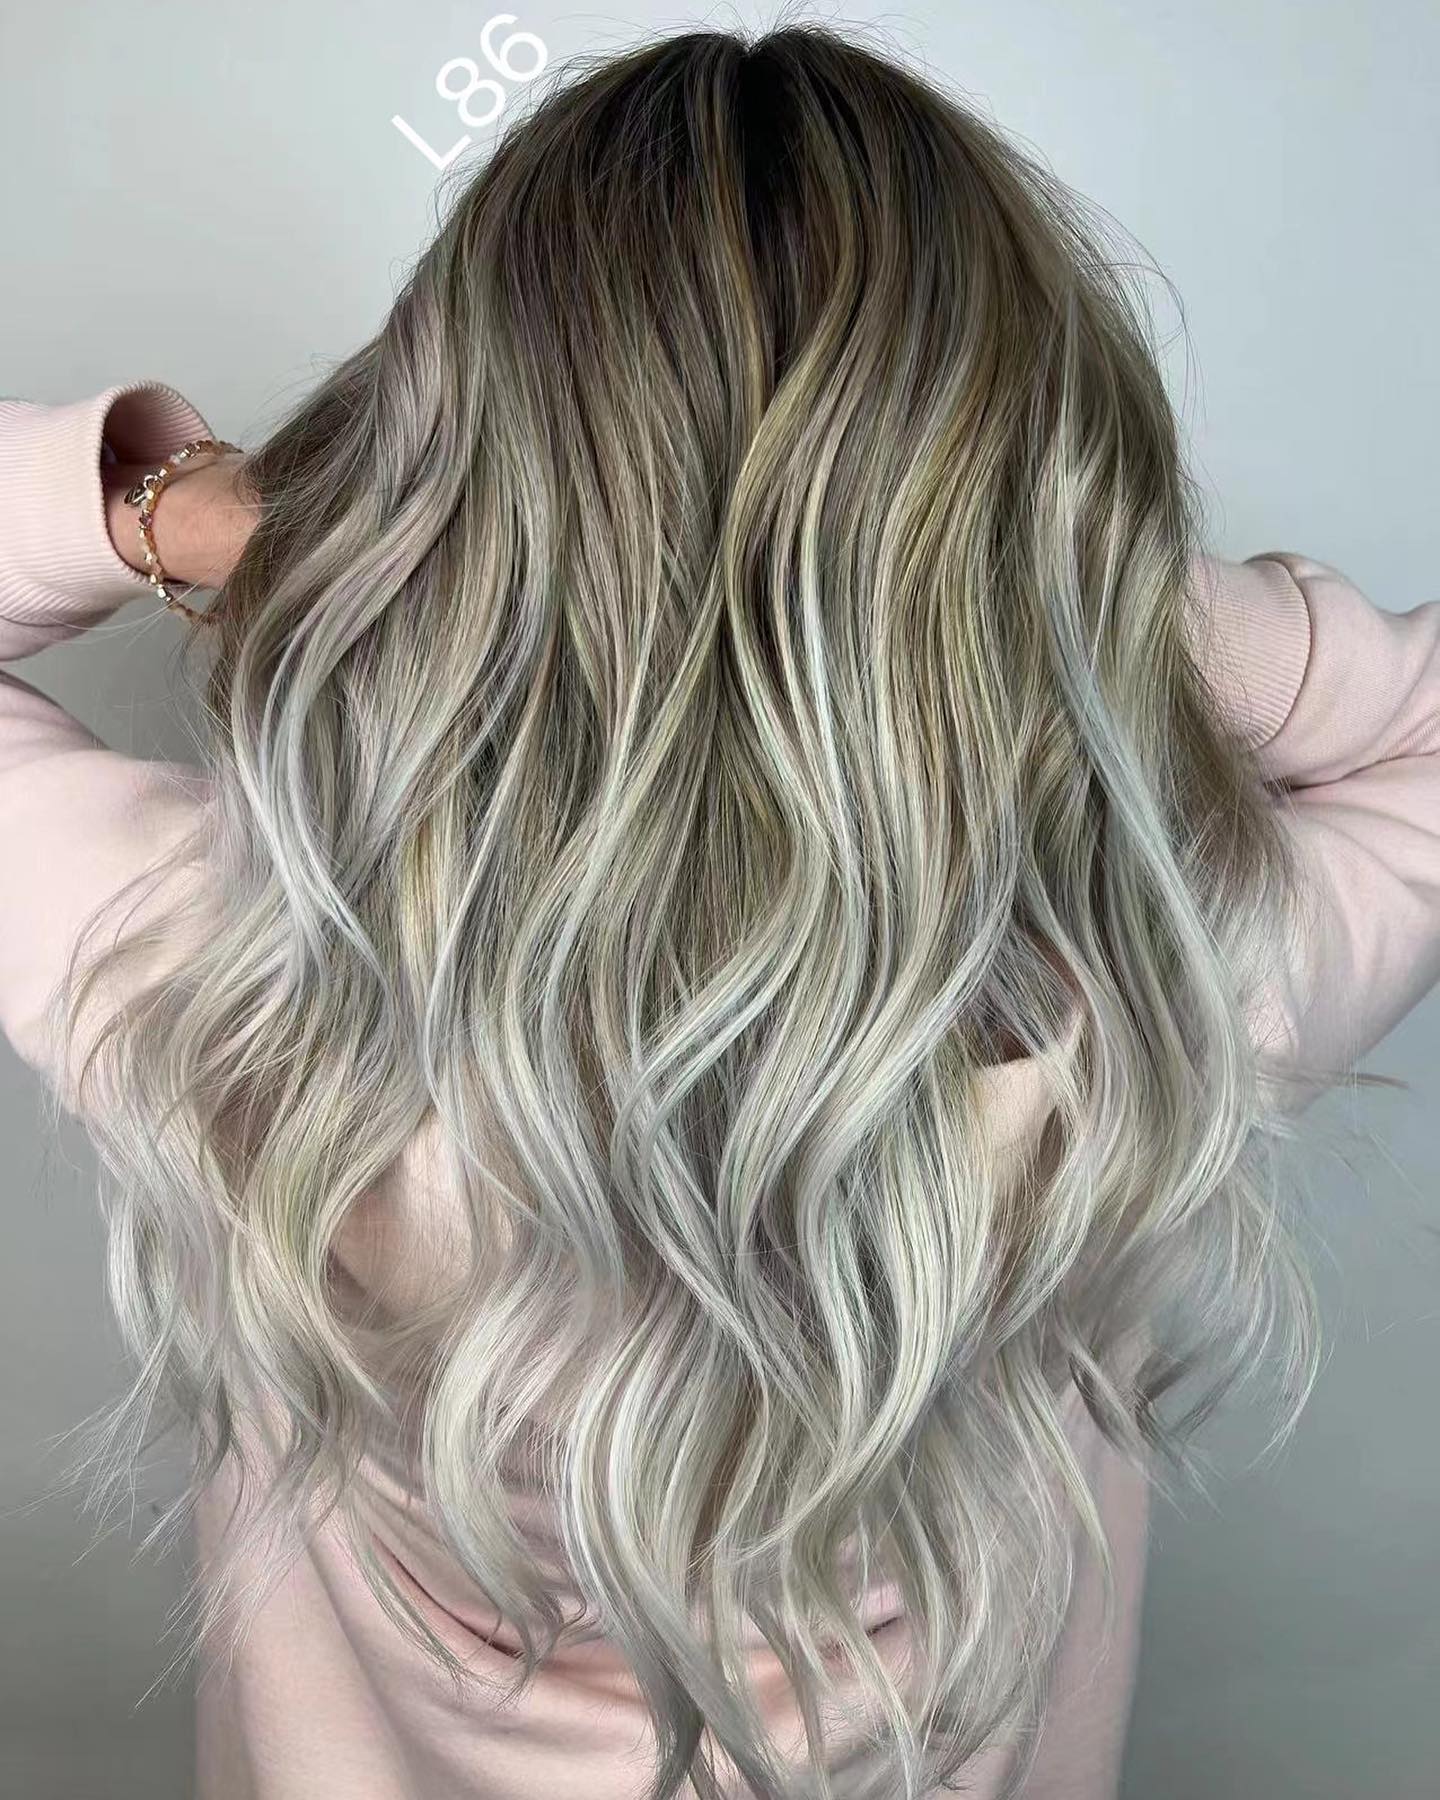 Long Hair with Natural Roots and Blonde Ends